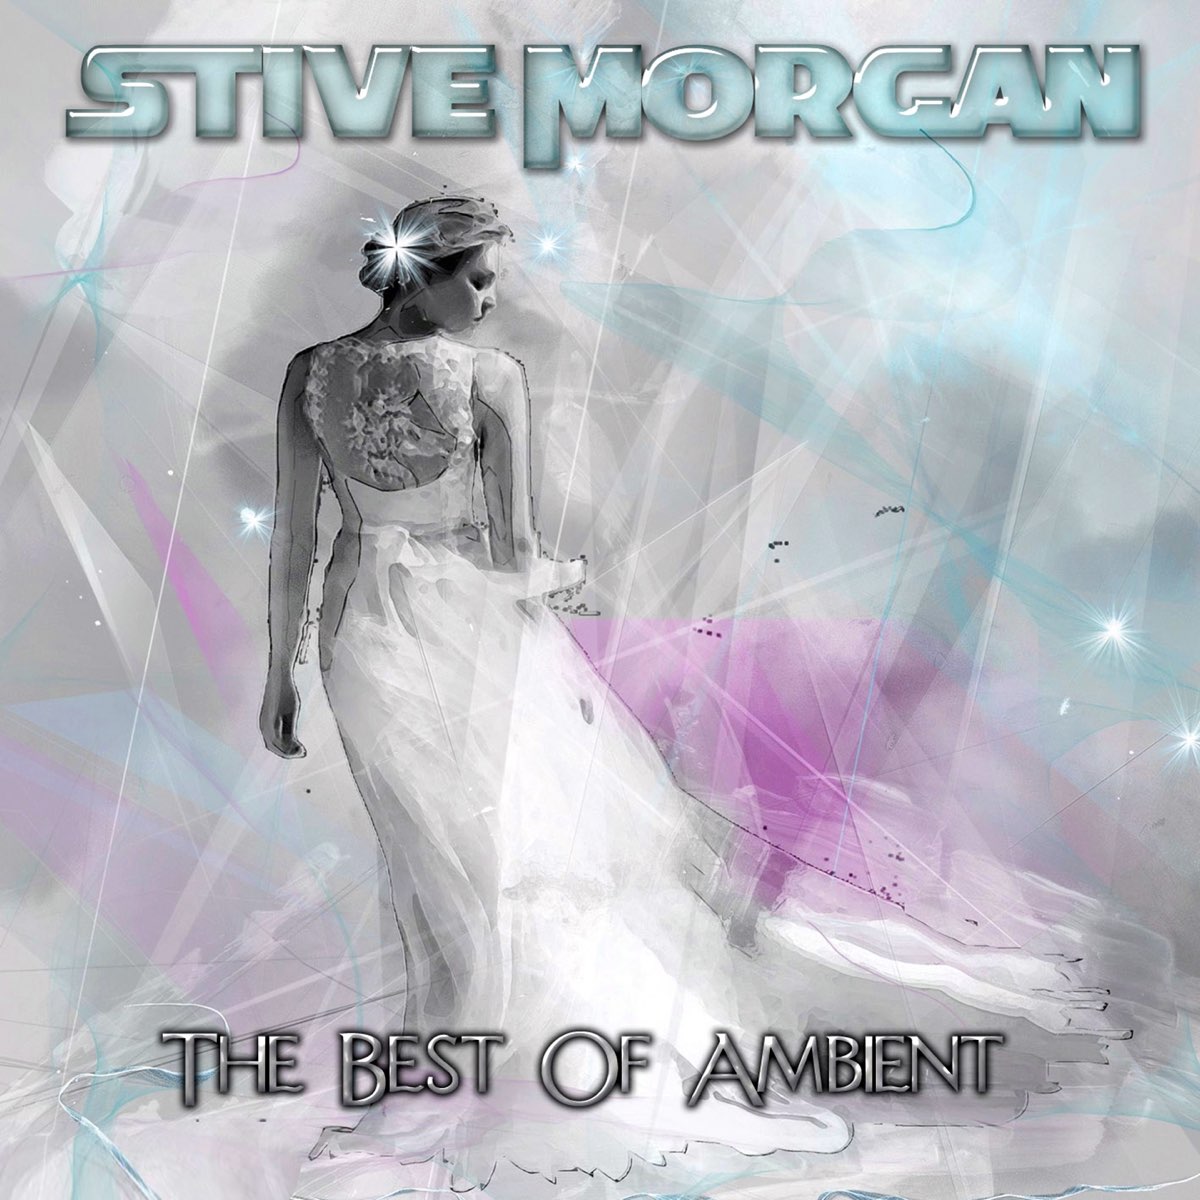 The Best of Ambient - Album by Stive Morgan - Apple Music